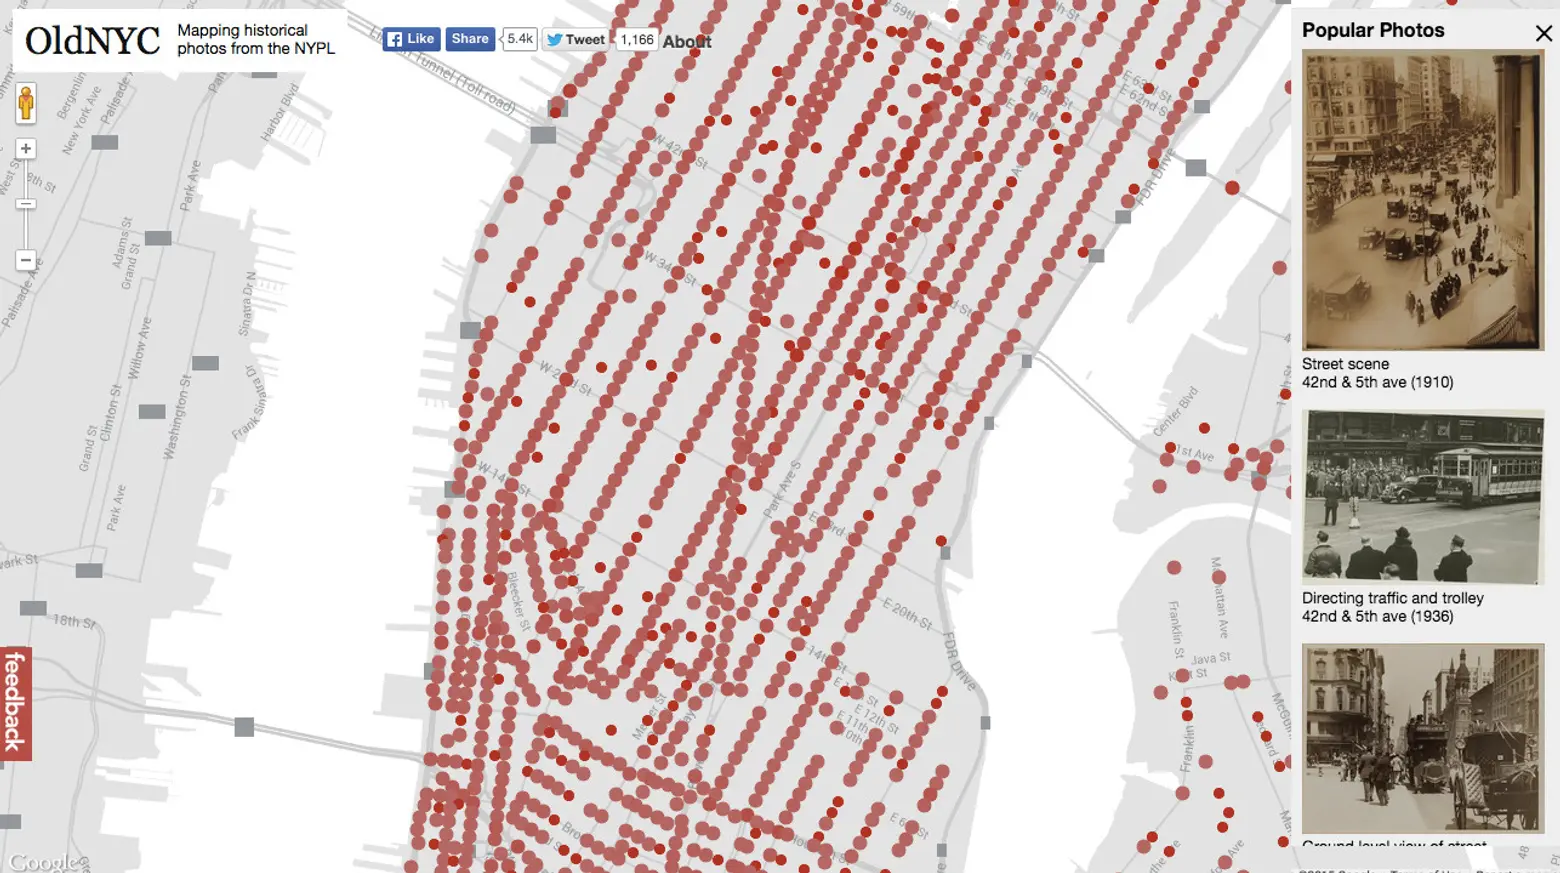 New York Public Library Releases Interactive Map of Its 80,000 Historic Photos